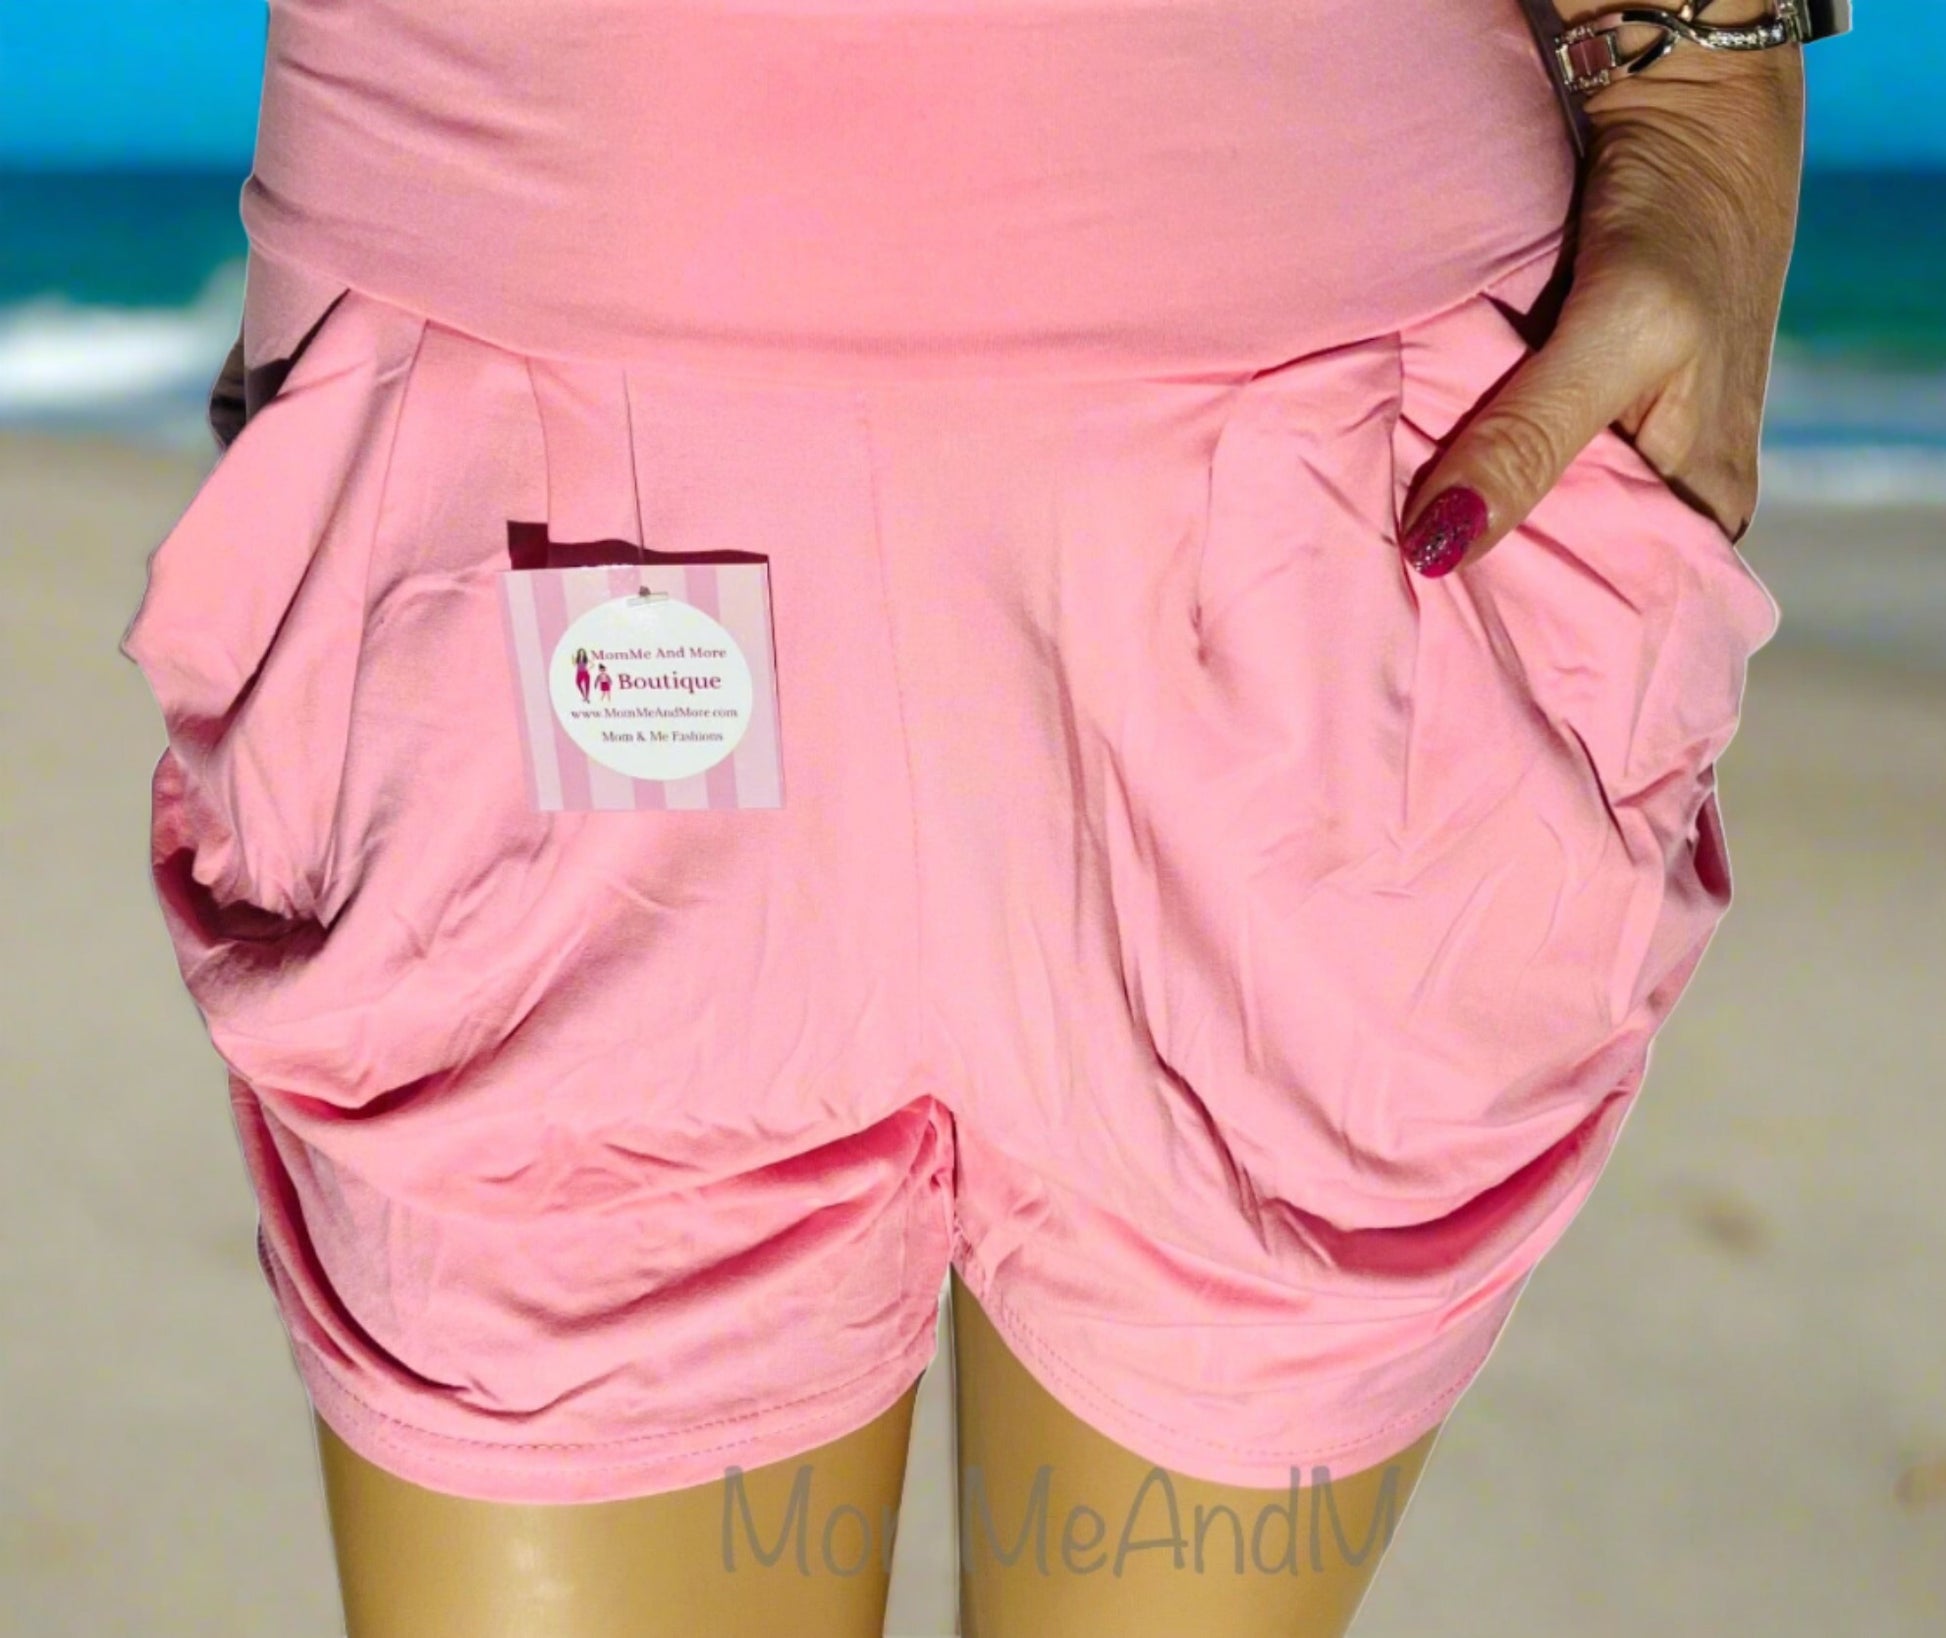 Womens Best Shorts, Light Pink Harem Shorts With Pockets Shorts MomMe and More 